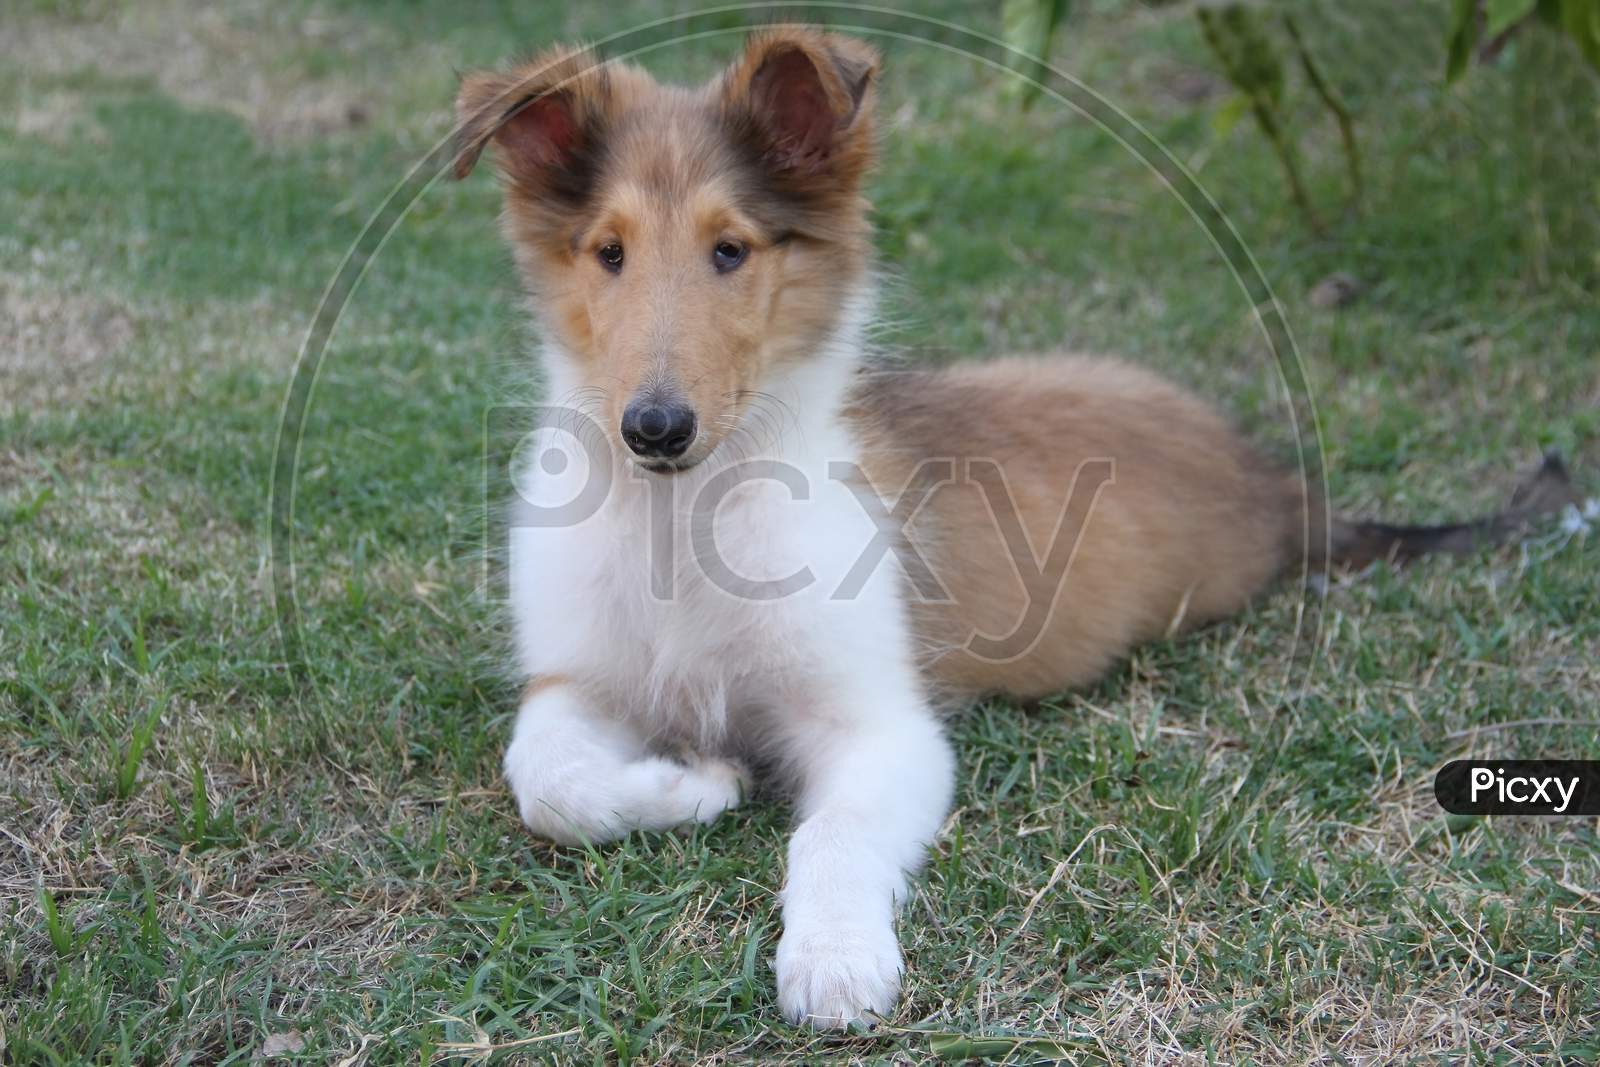 Collie Puppy Playing On The Green Grass